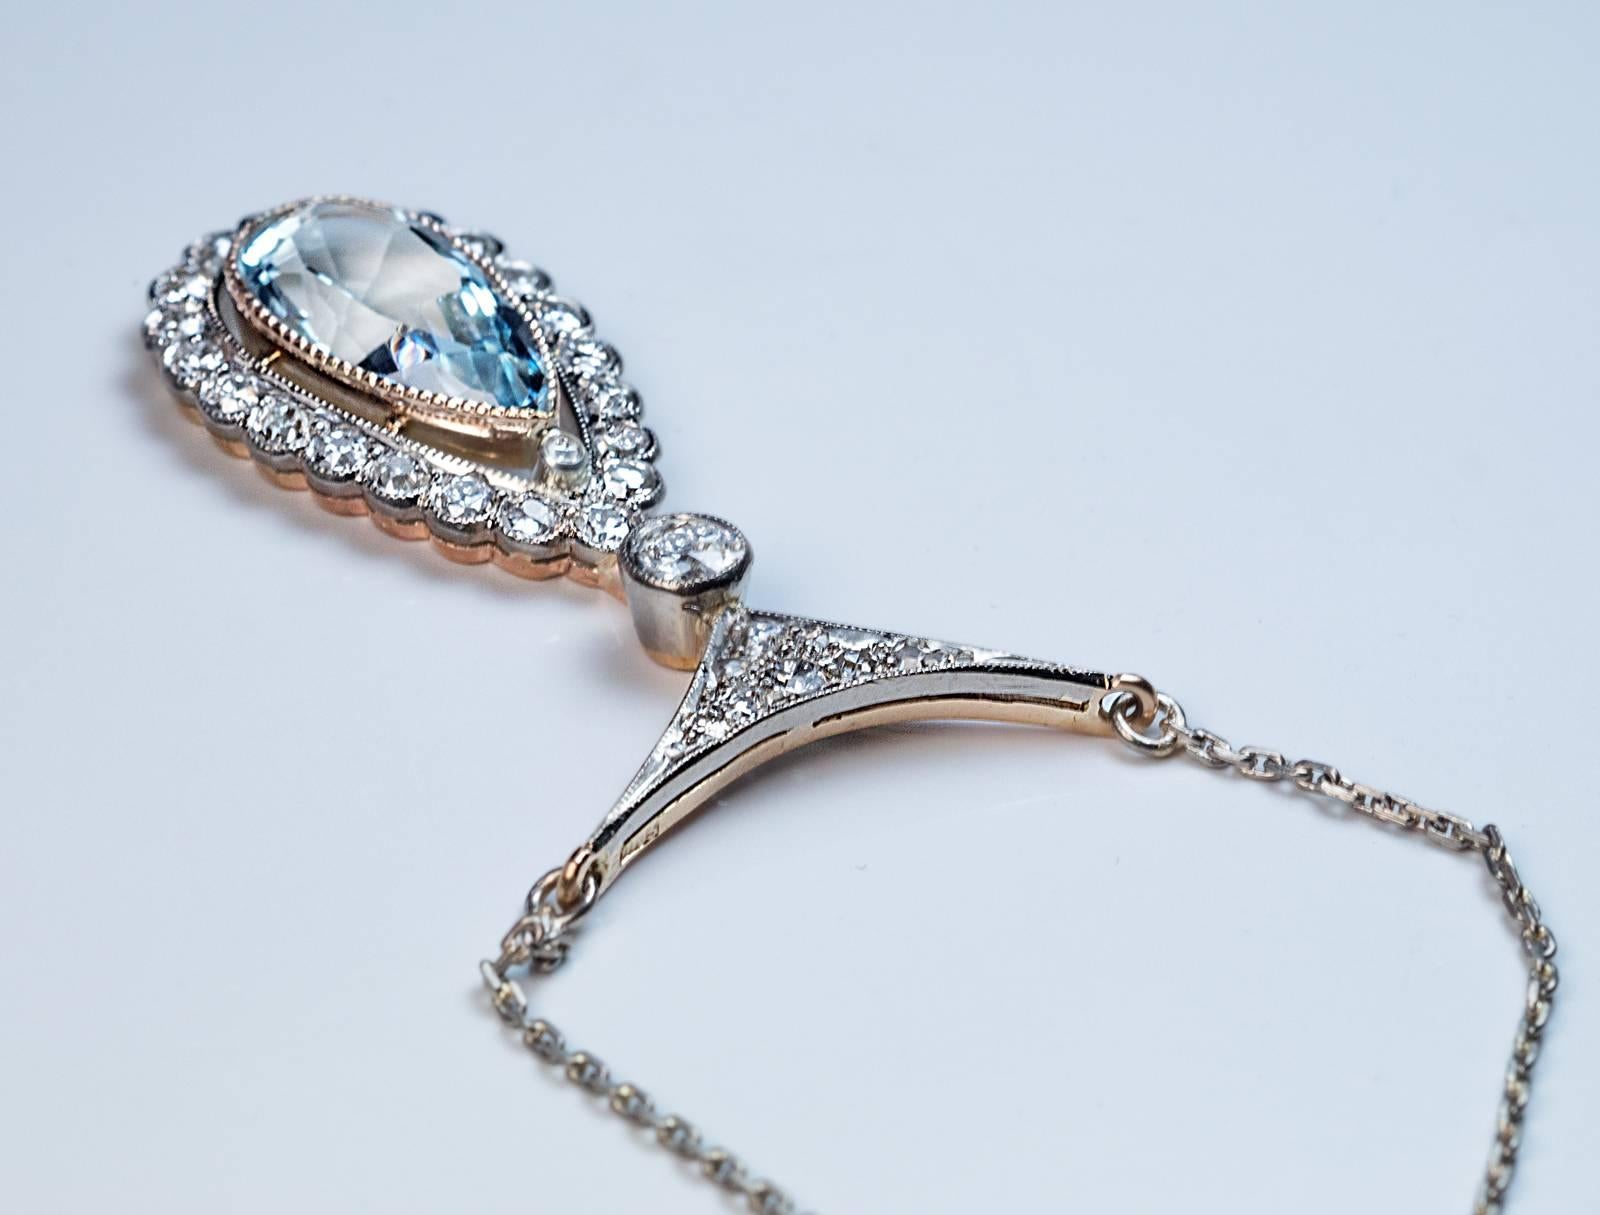 Russian, made in St. Petersburg in the 1930s

The 14K white and yellow gold necklace is set with a drop shaped aquamarine (16 x 8 x 5.25 mm, approximately 3.31 ct) framed by sparkling bright white (G-H color) diamonds (mostly old European cut).